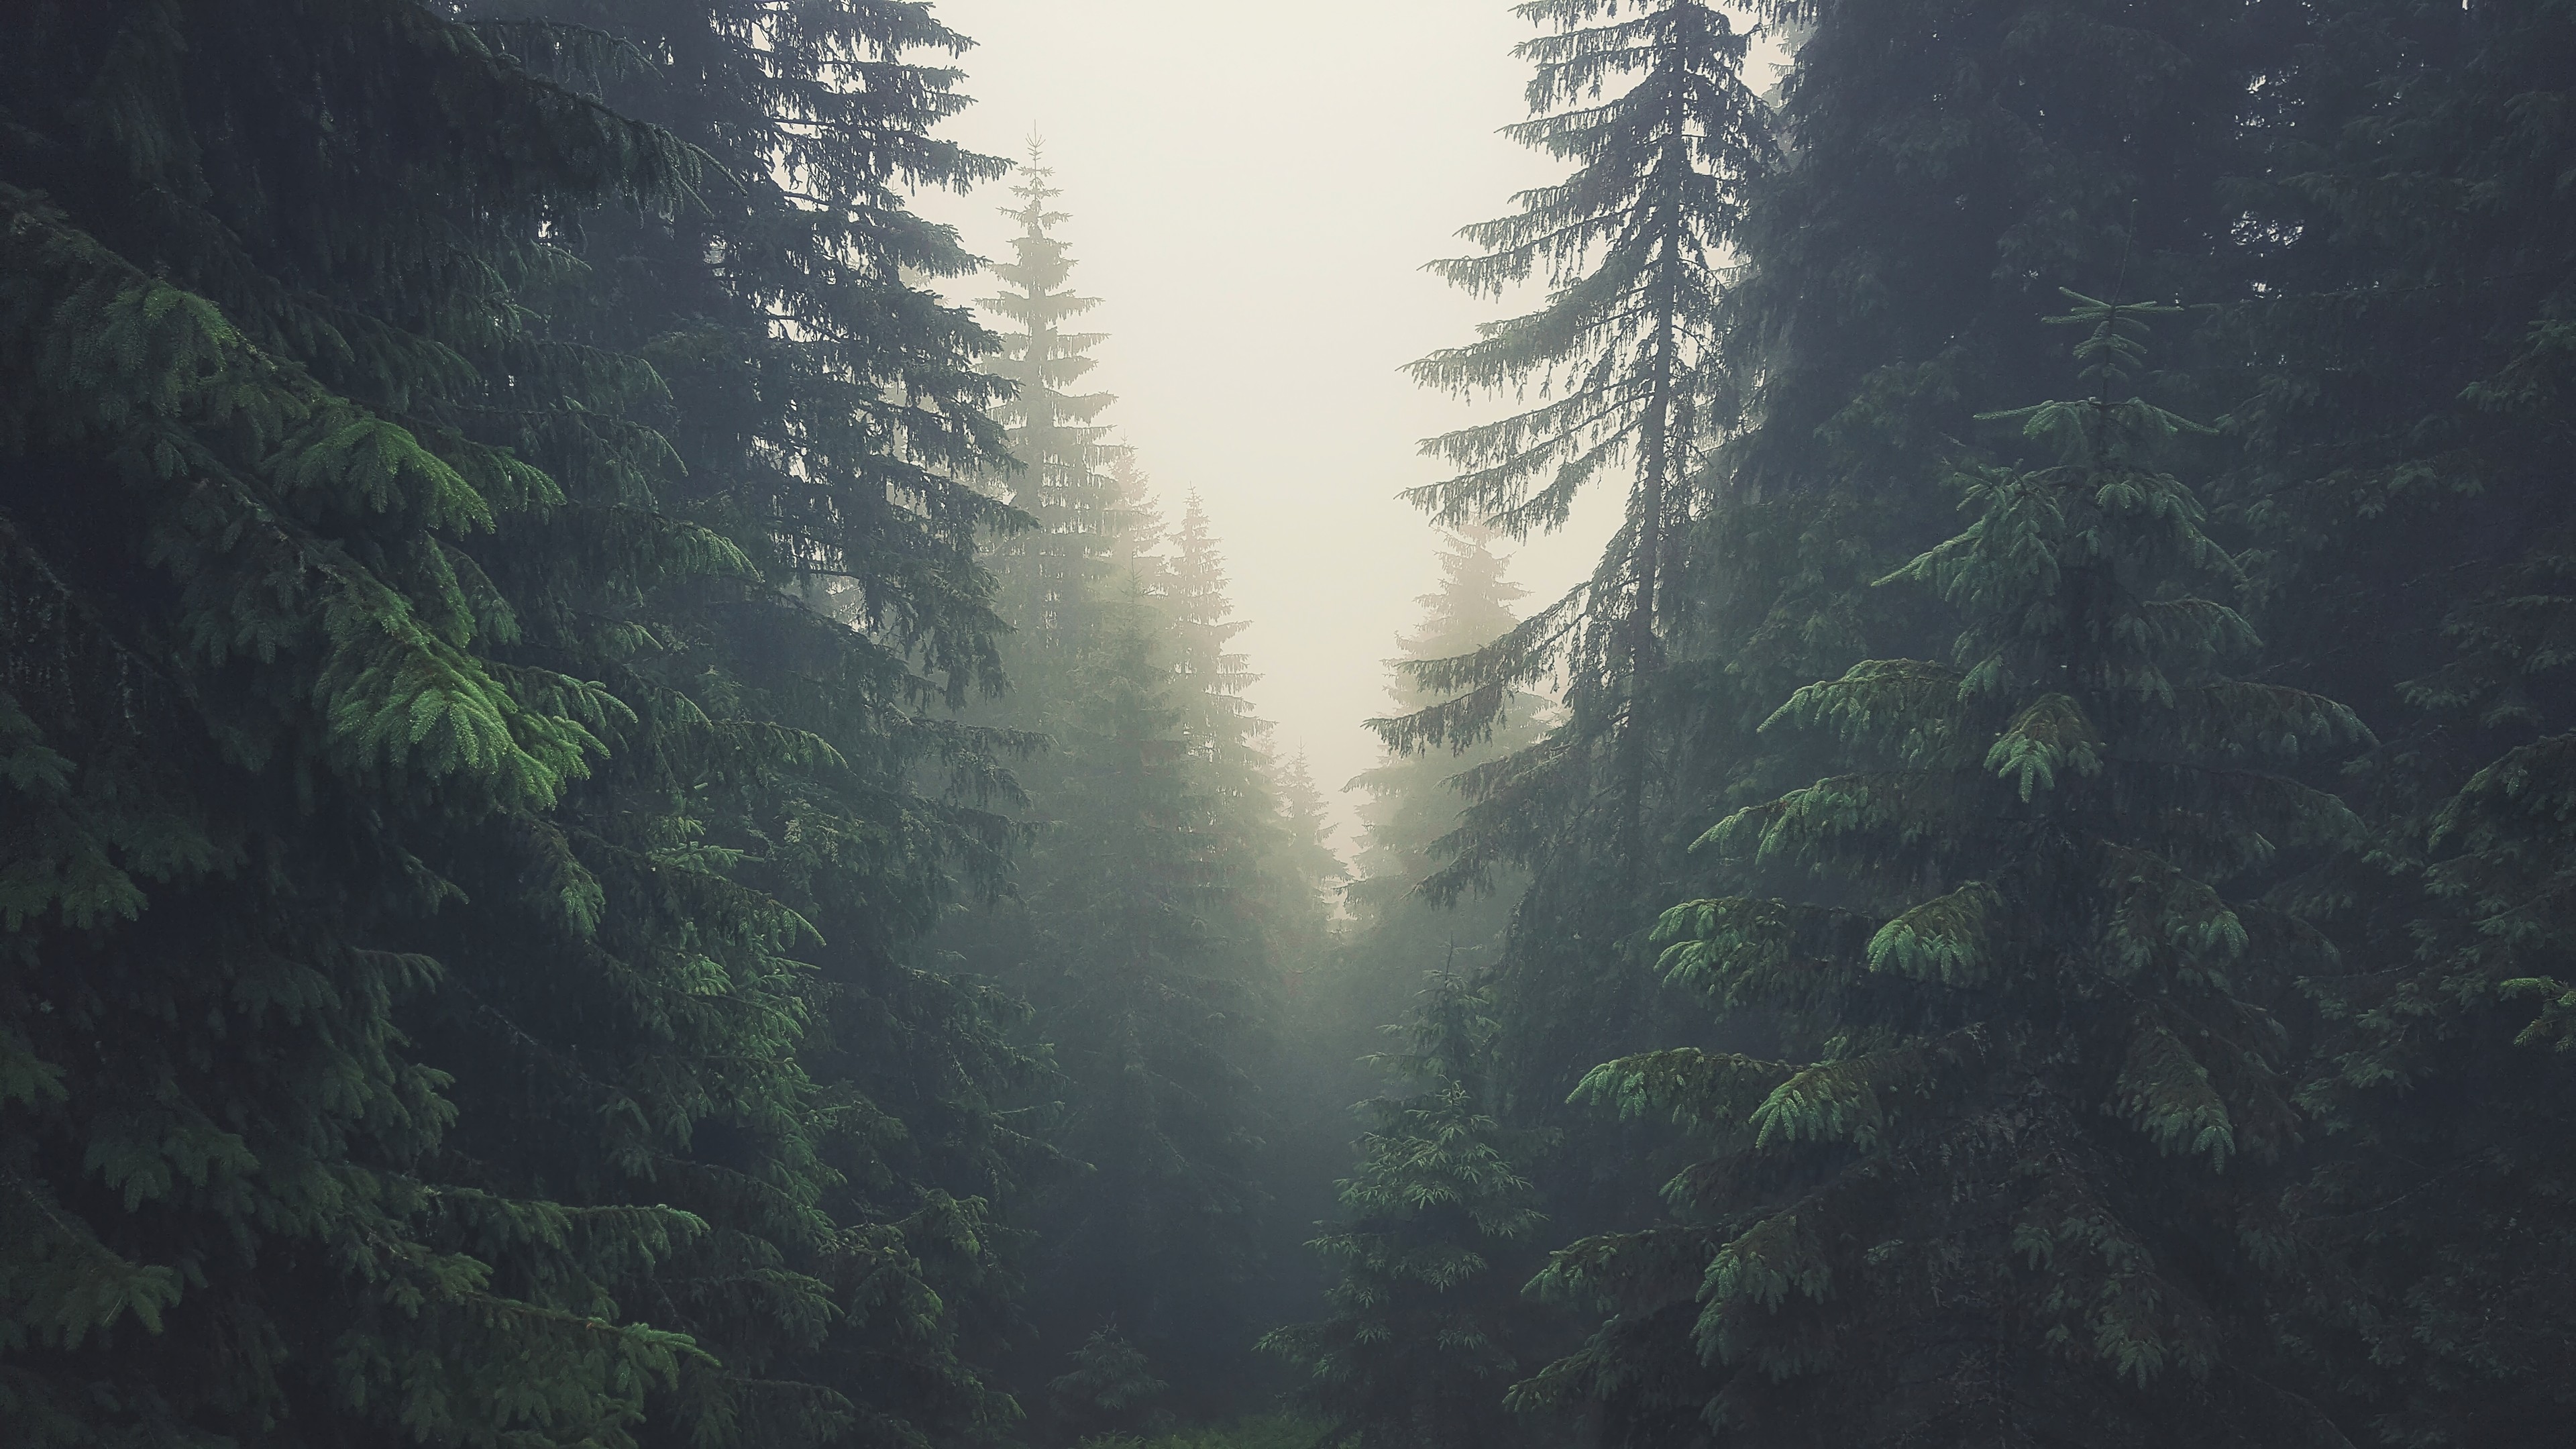 What is the title of this picture ? trees, Forest, Tatra Mountains, Tatra, Slovakia, Mist, Pine trees